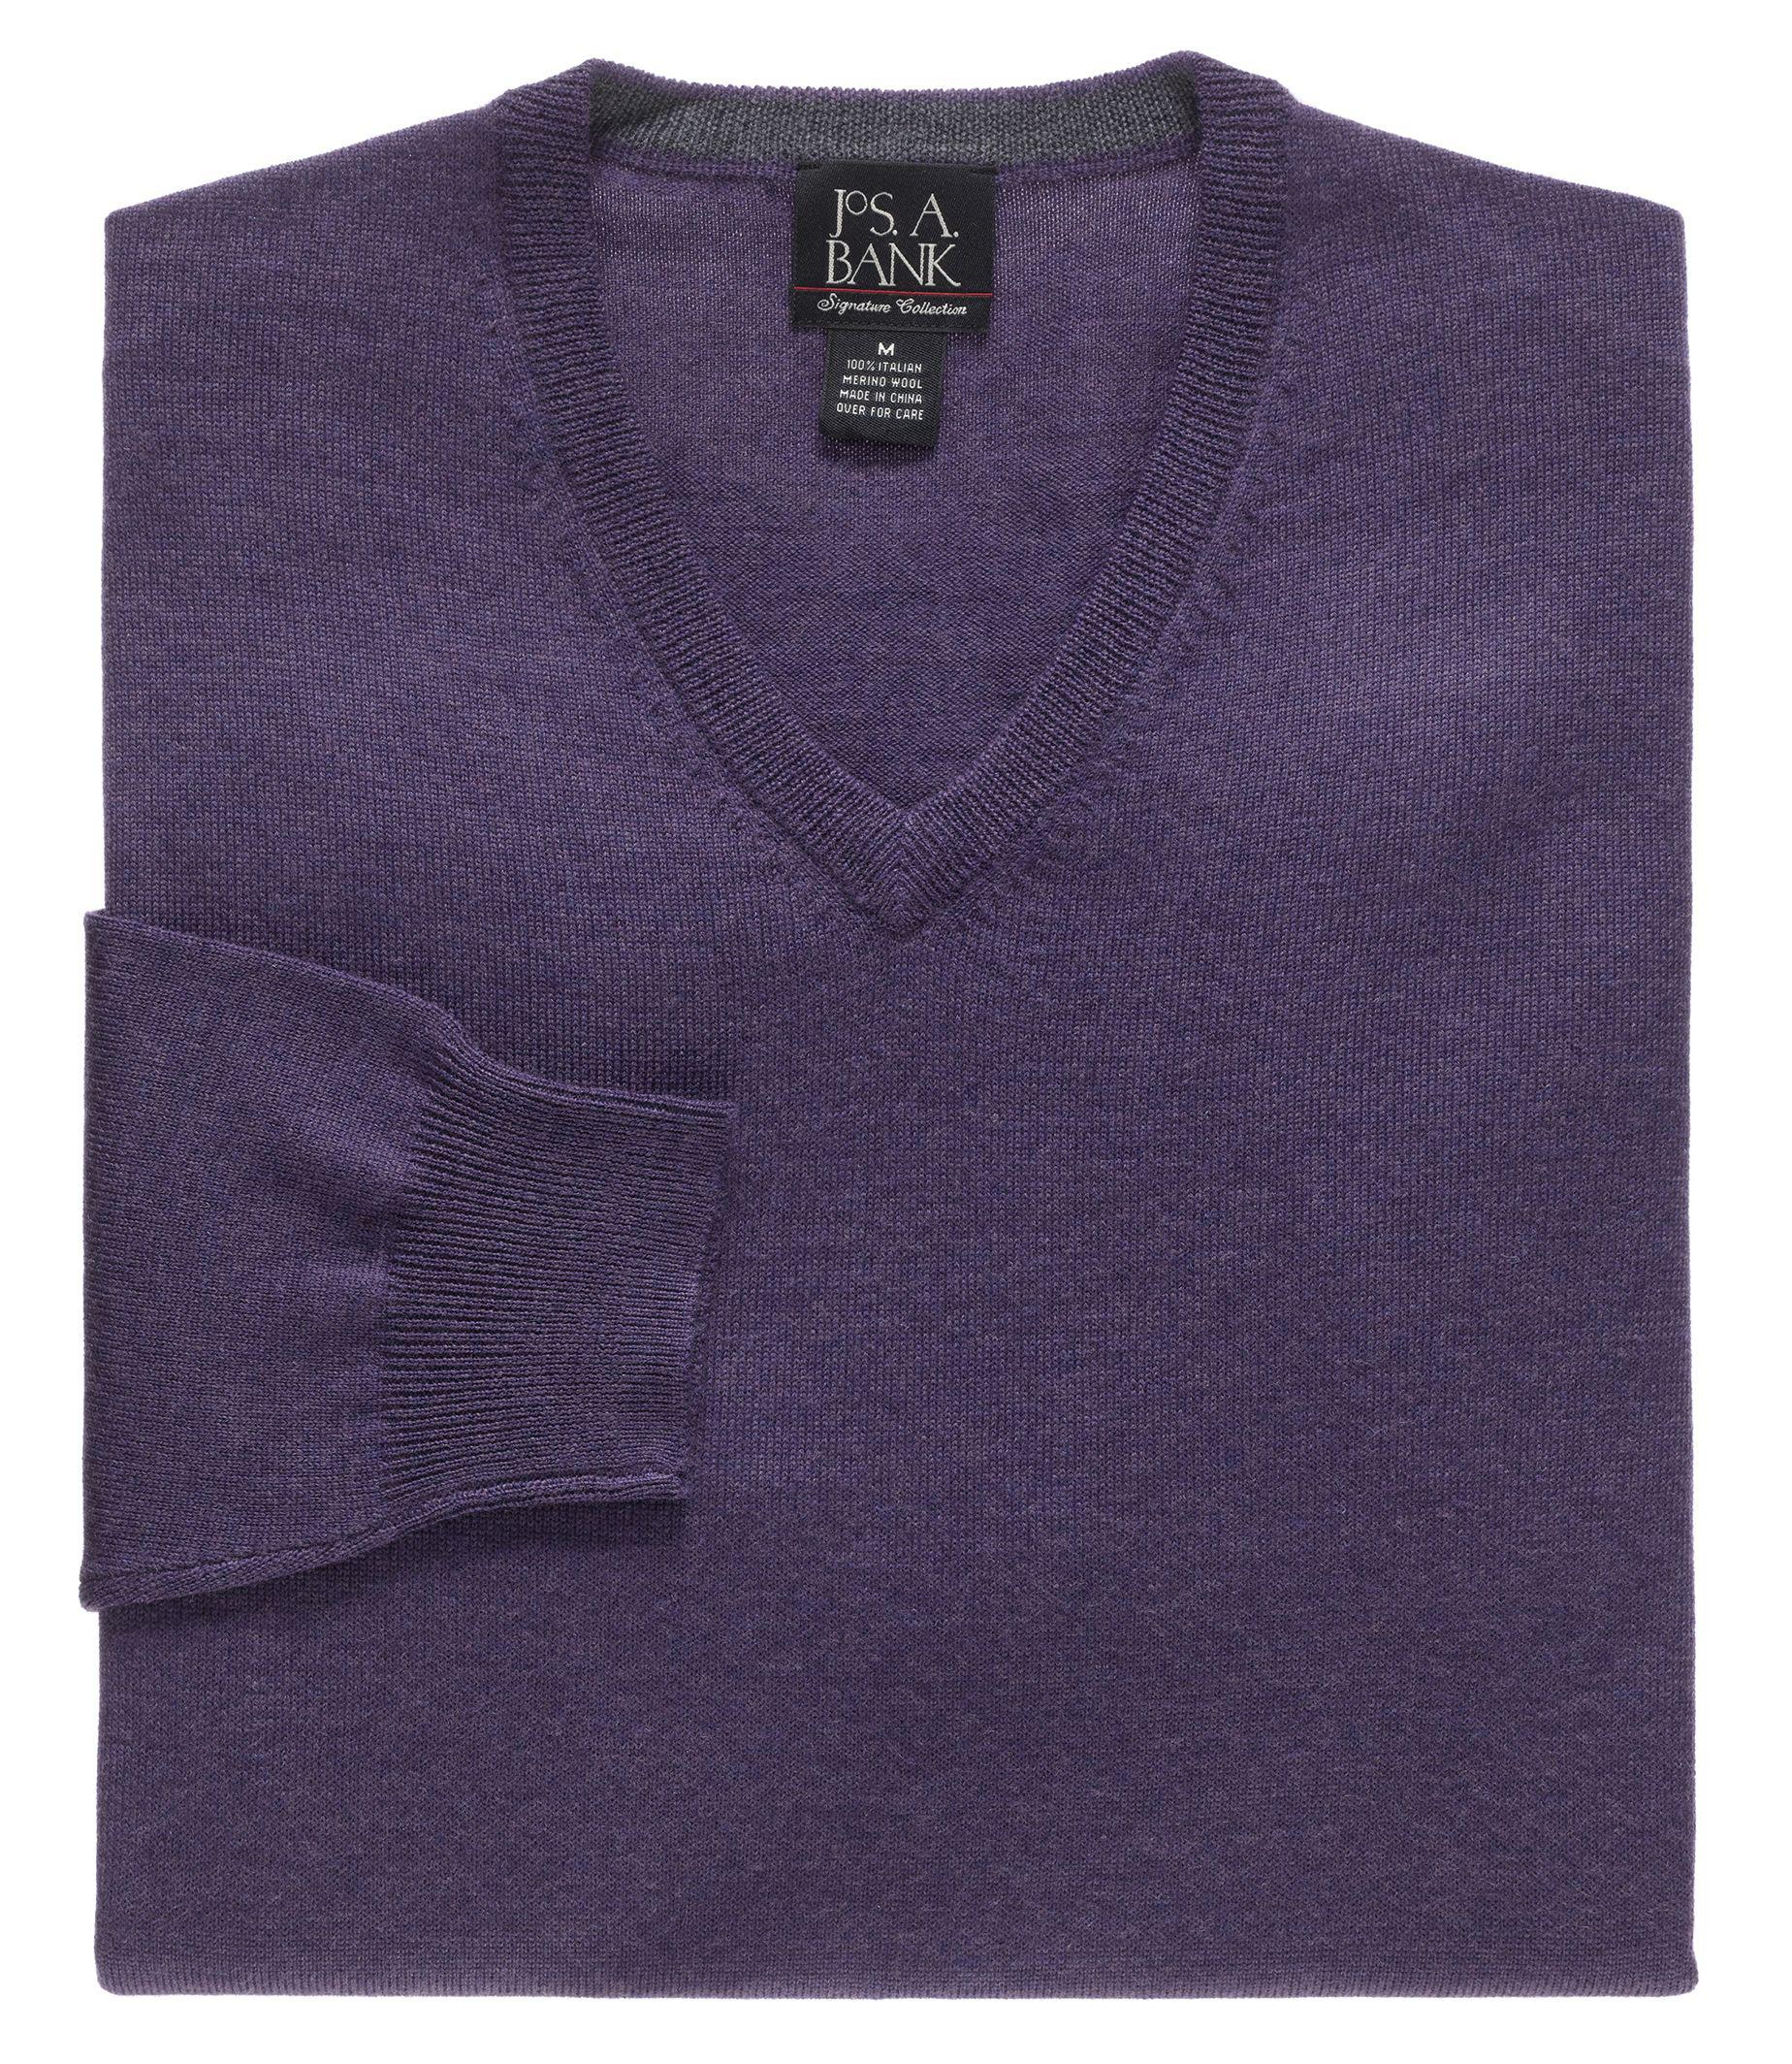 Lyst - Jos. A. Bank Signature Merino Wool V-neck Sweater Clearance in ...